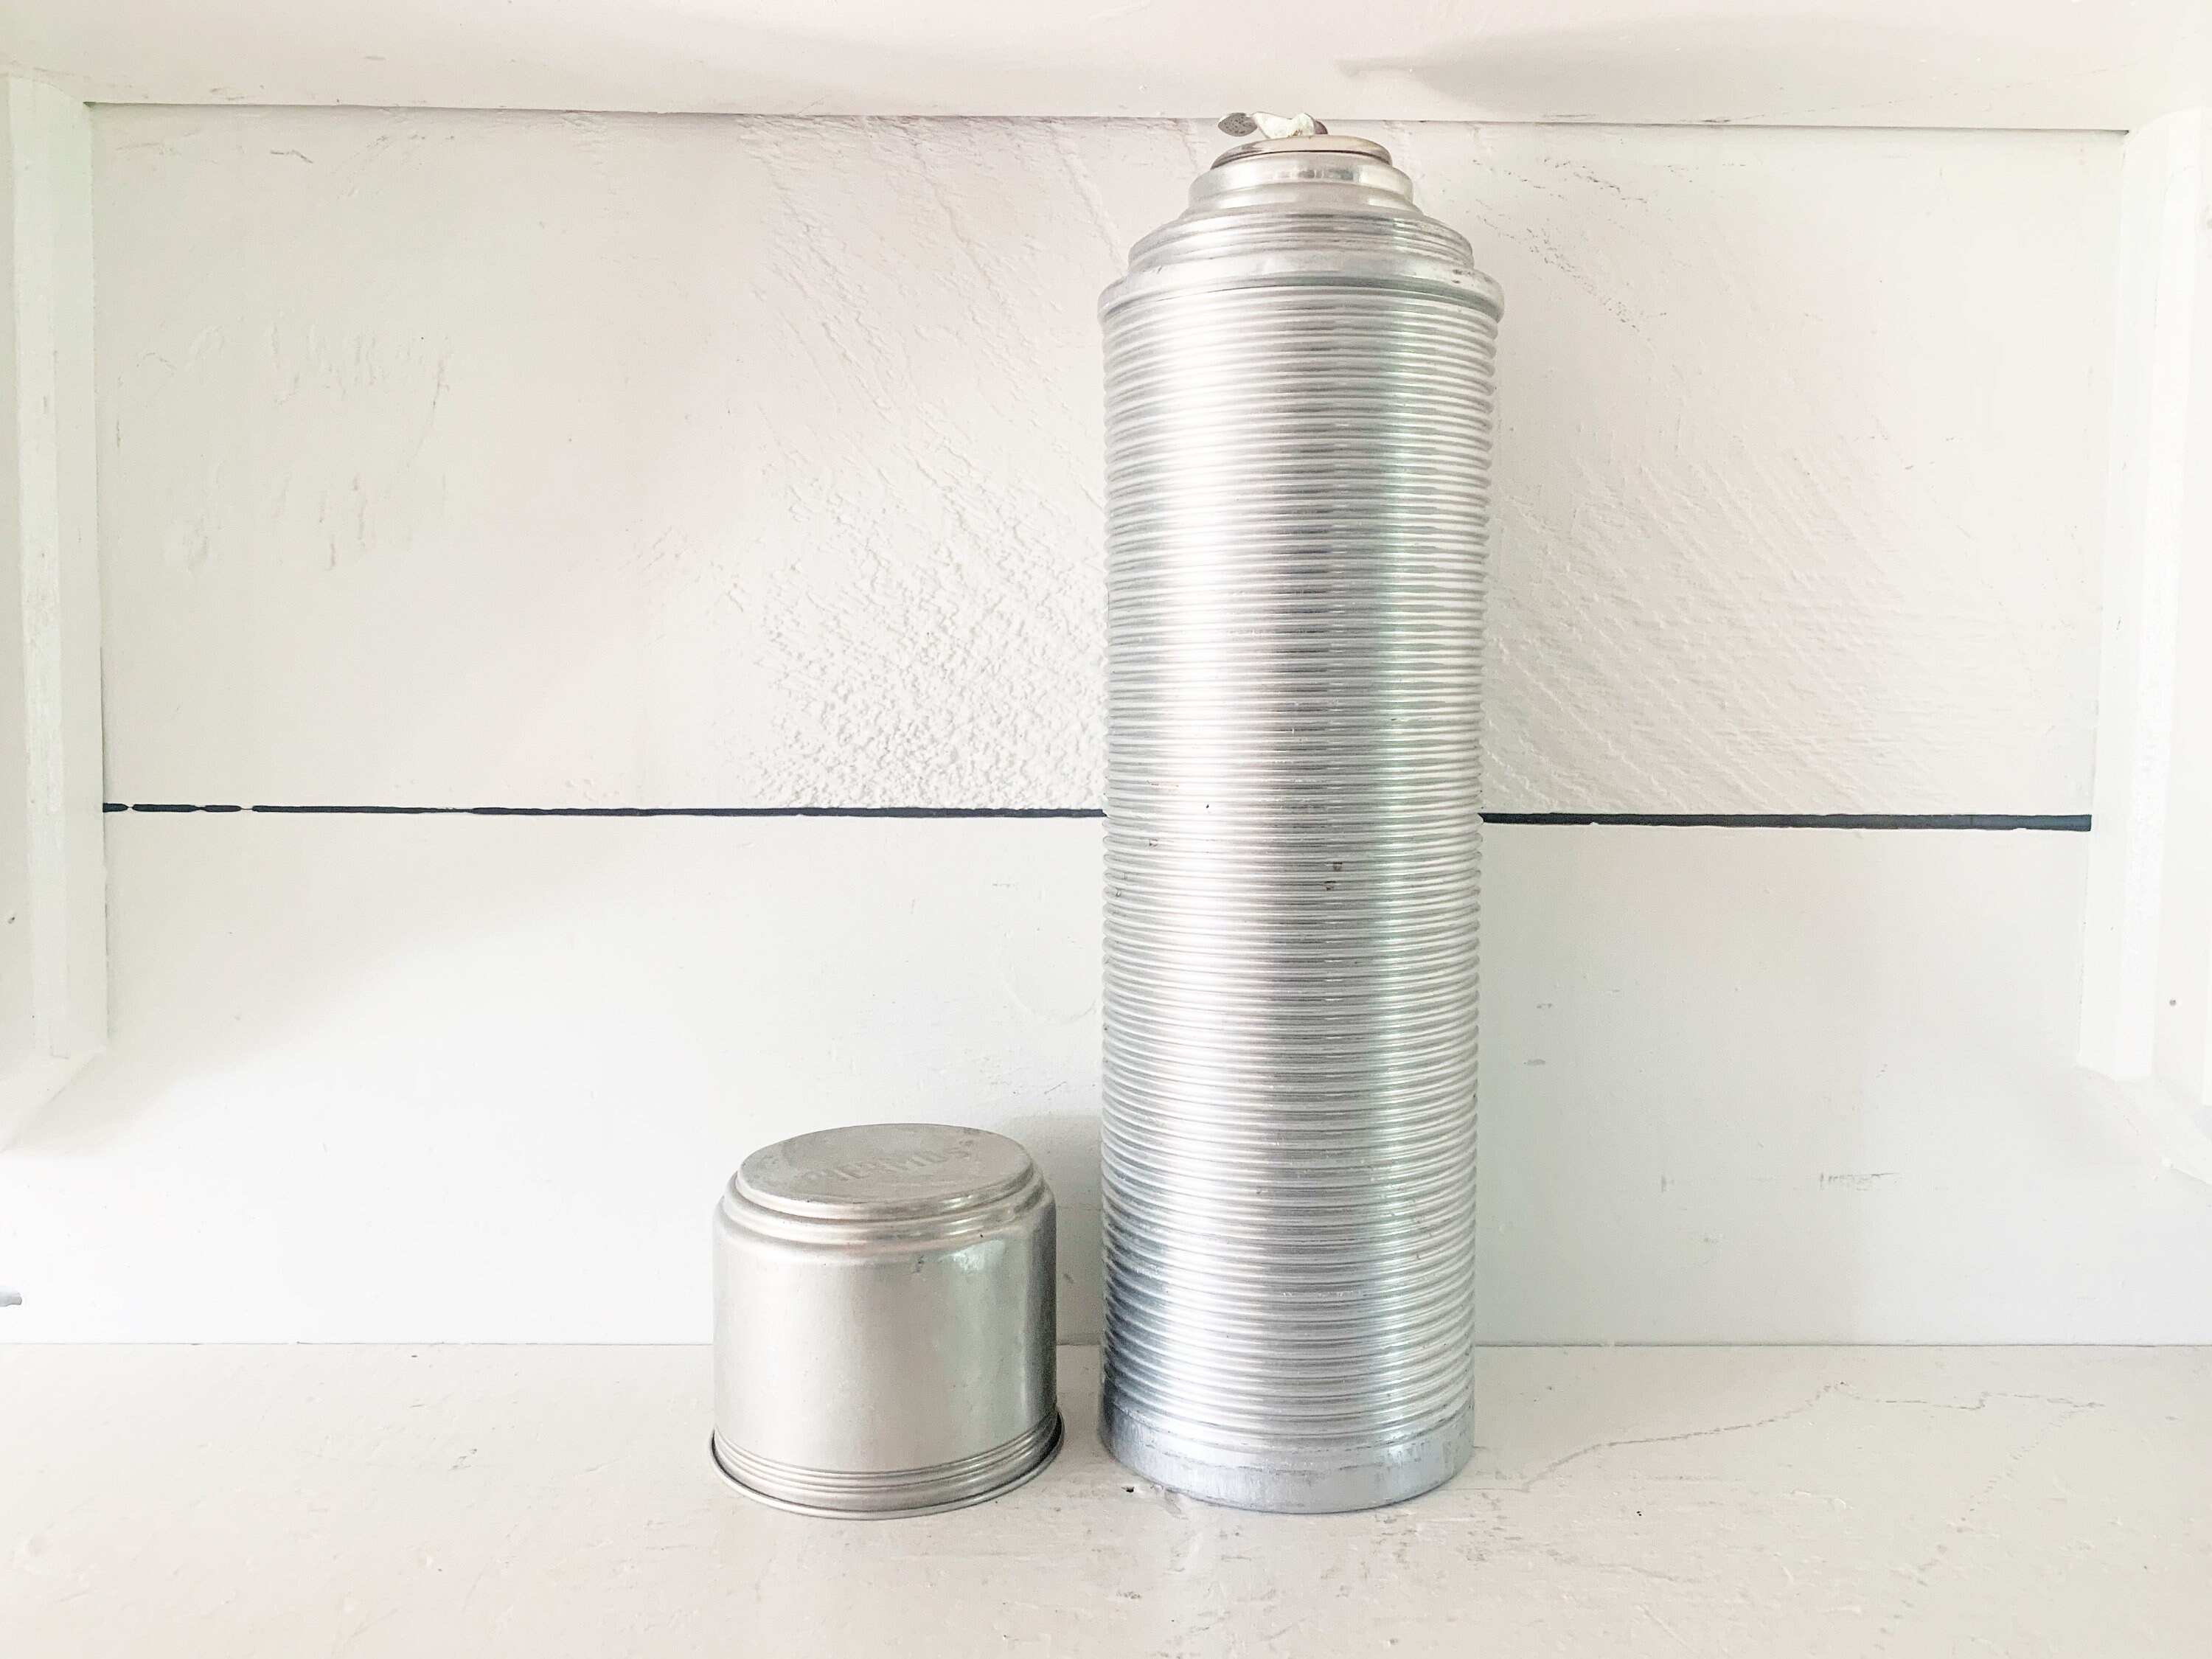 Vintage Aluminum Ribbed Thermos Brand Vacuum Thermos With Glass